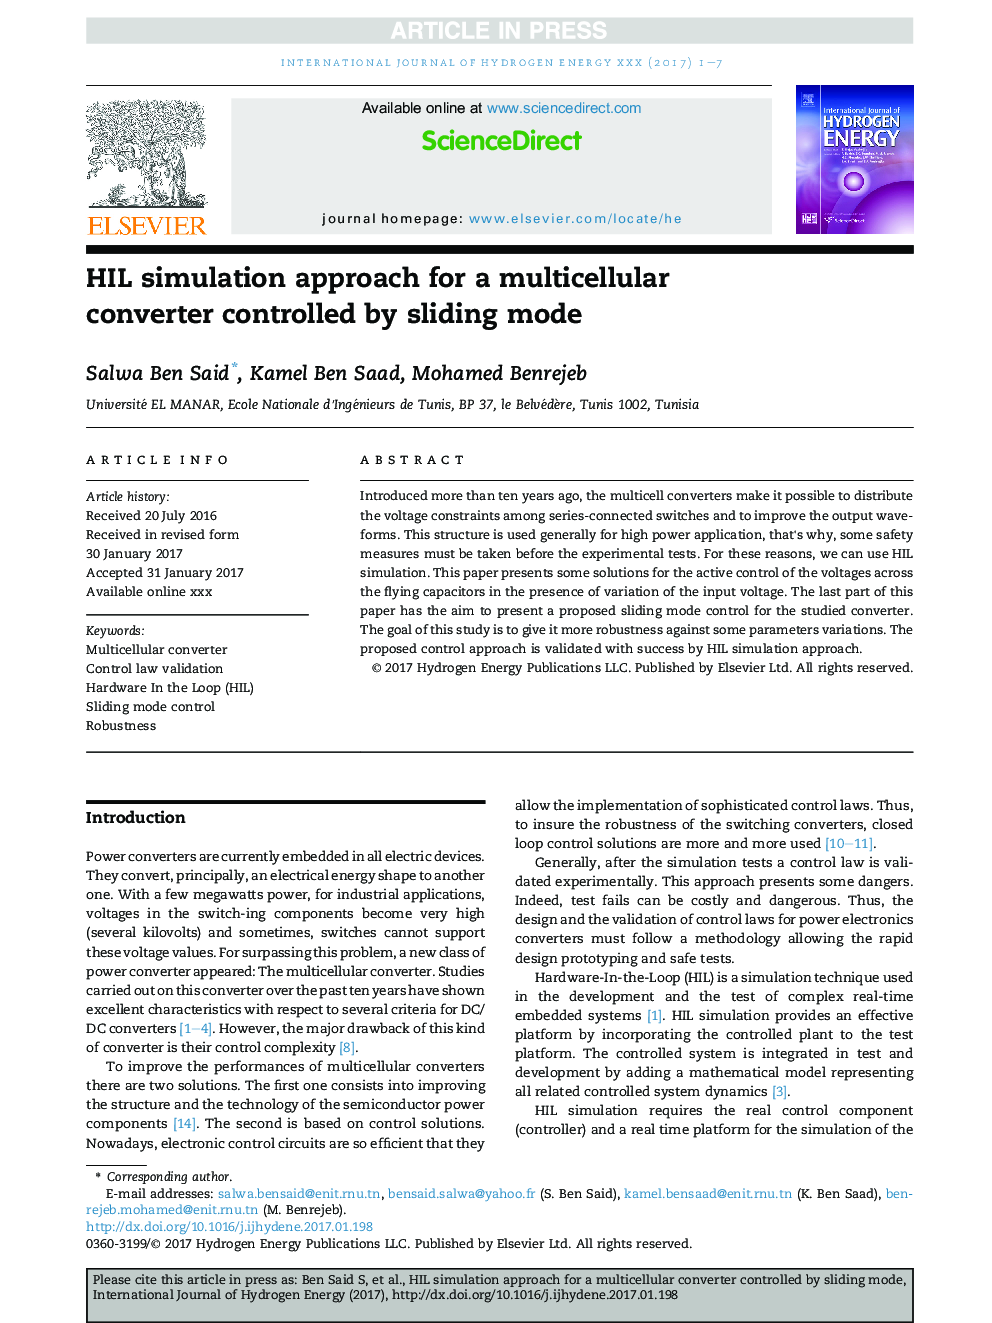 HIL simulation approach for a multicellular converter controlled by sliding mode